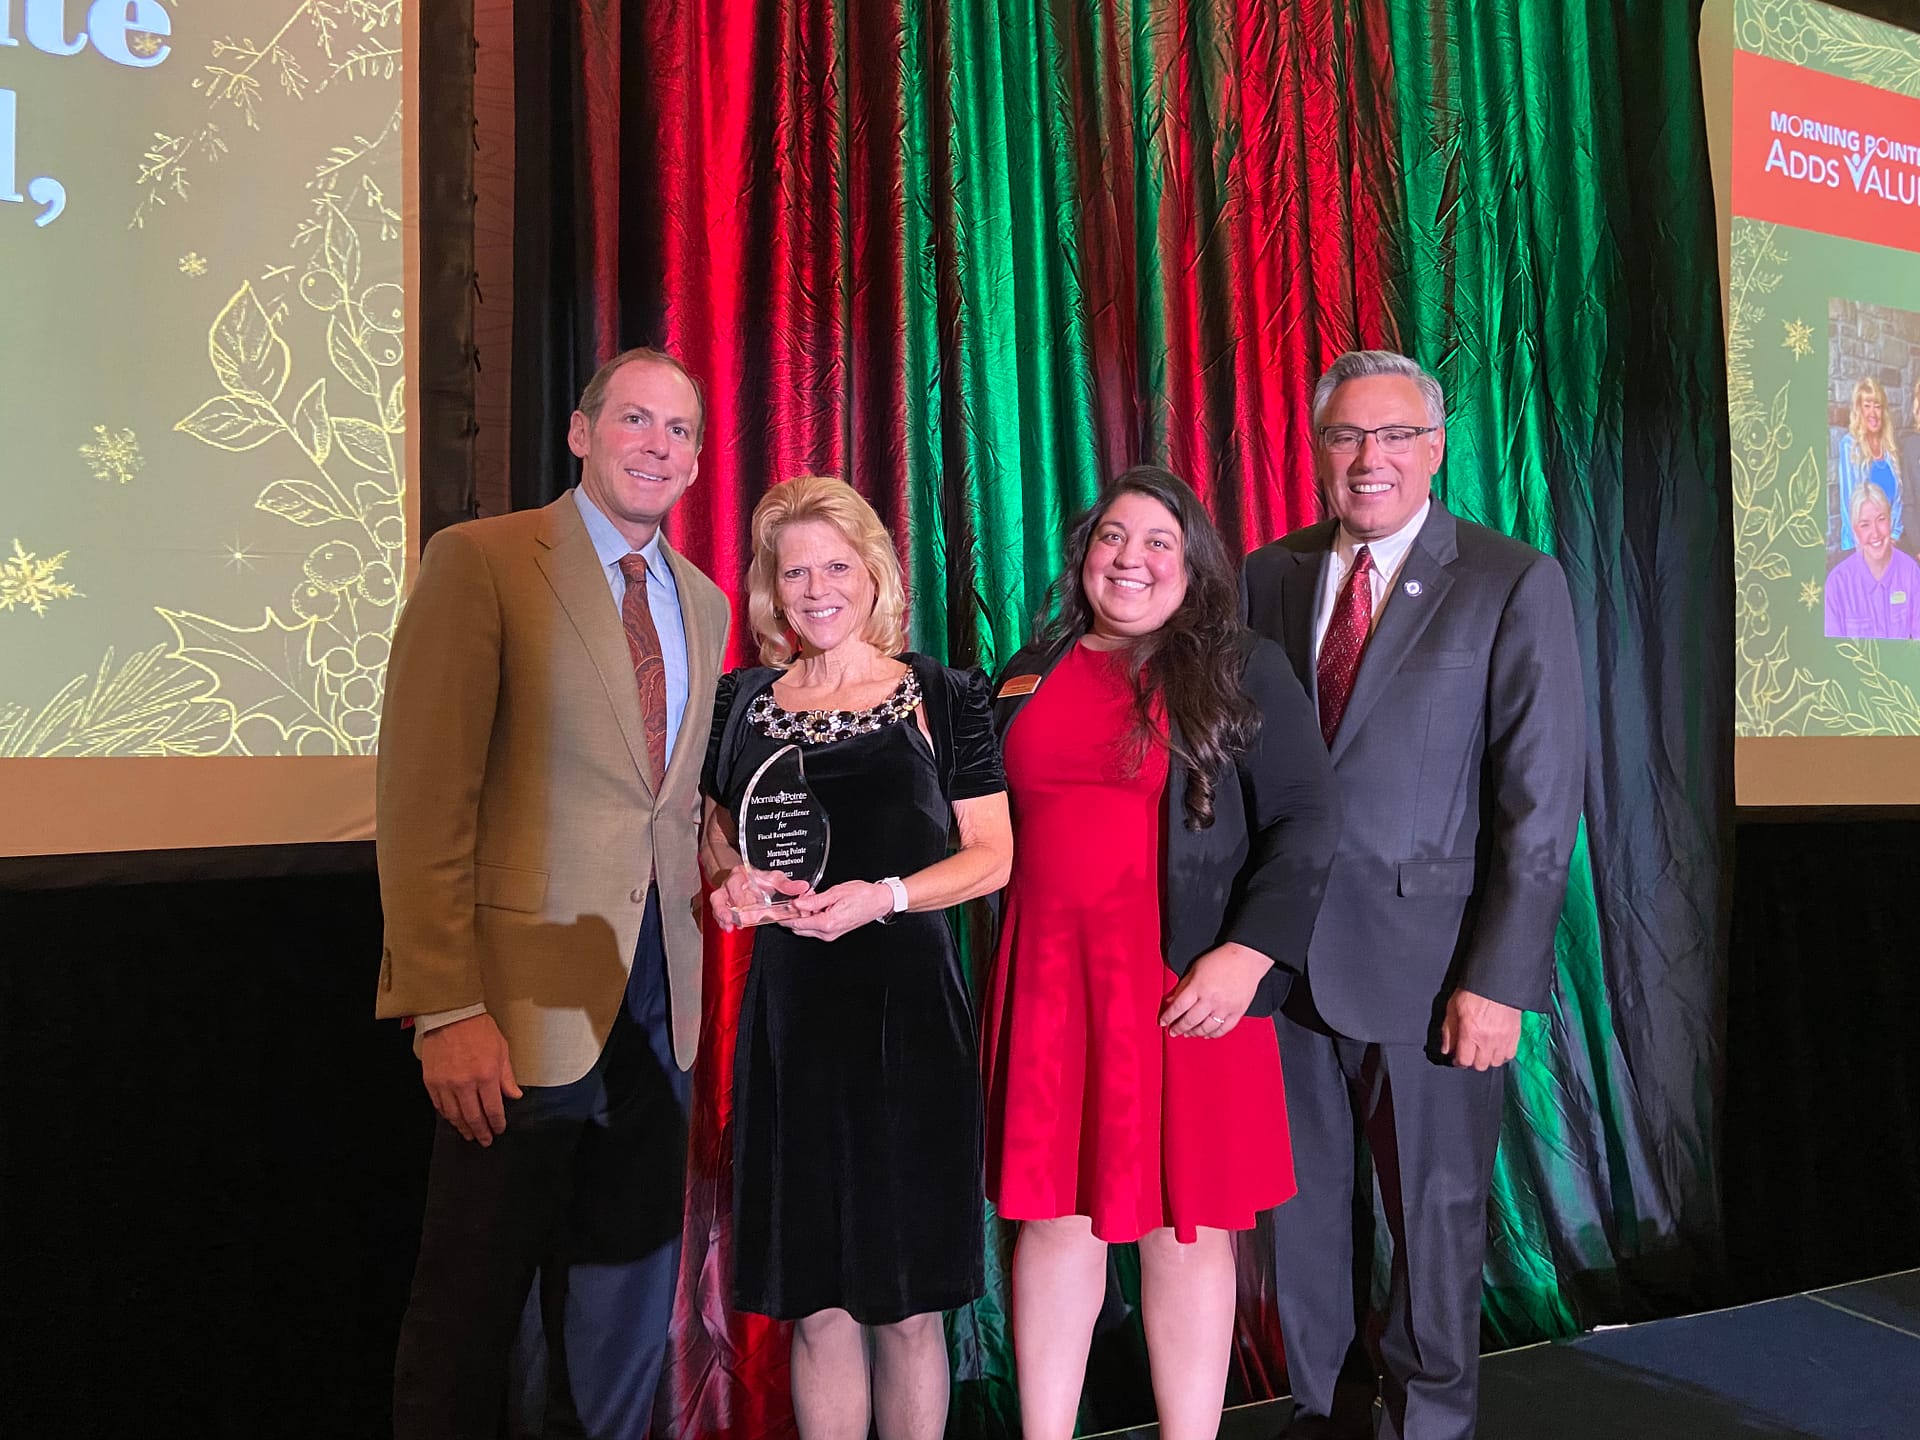 Left to right: Franklin Farrow, Morning Pointe Senior Living Co-Founder and CEO; Lisa Melby, Executive Director of Morning Pointe of Brentwood, winner of the Fiscal Responsibility Award; Lauren Lee, Senior VP of Accounting; and Greg A. Vital, Morning Pointe Senior Living Co-Founder and President